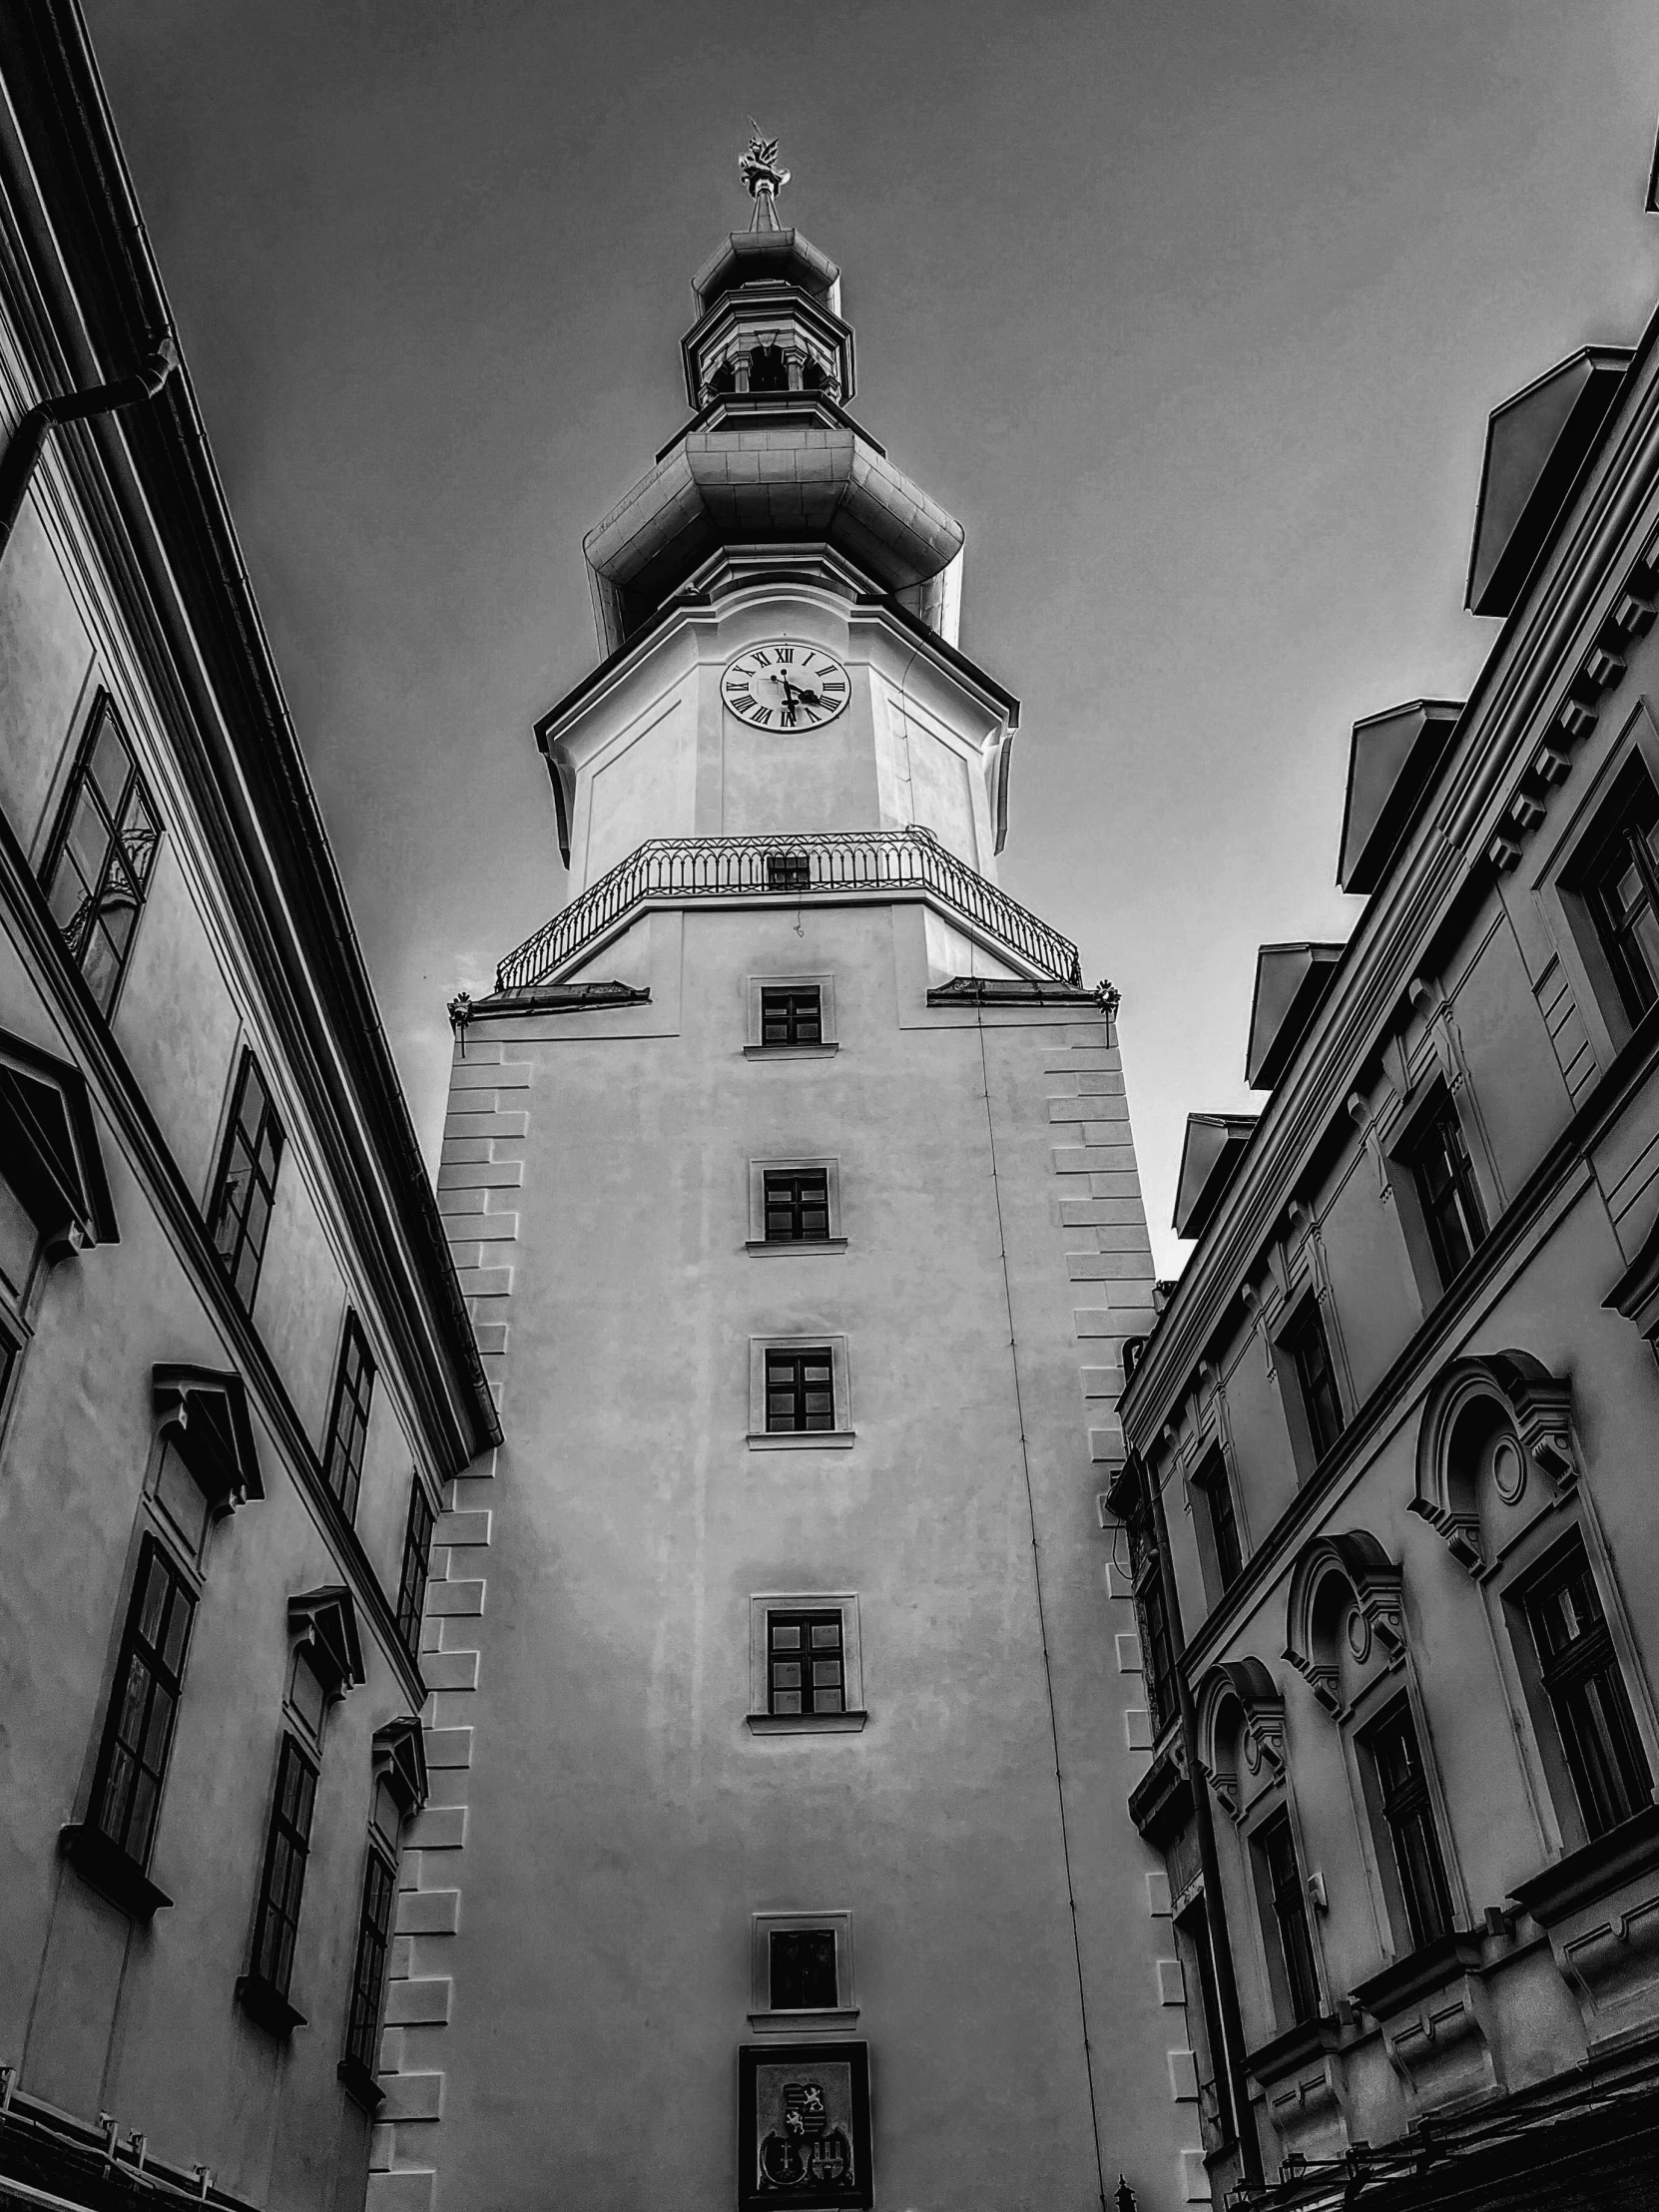 black and white picture of a tall clock tower